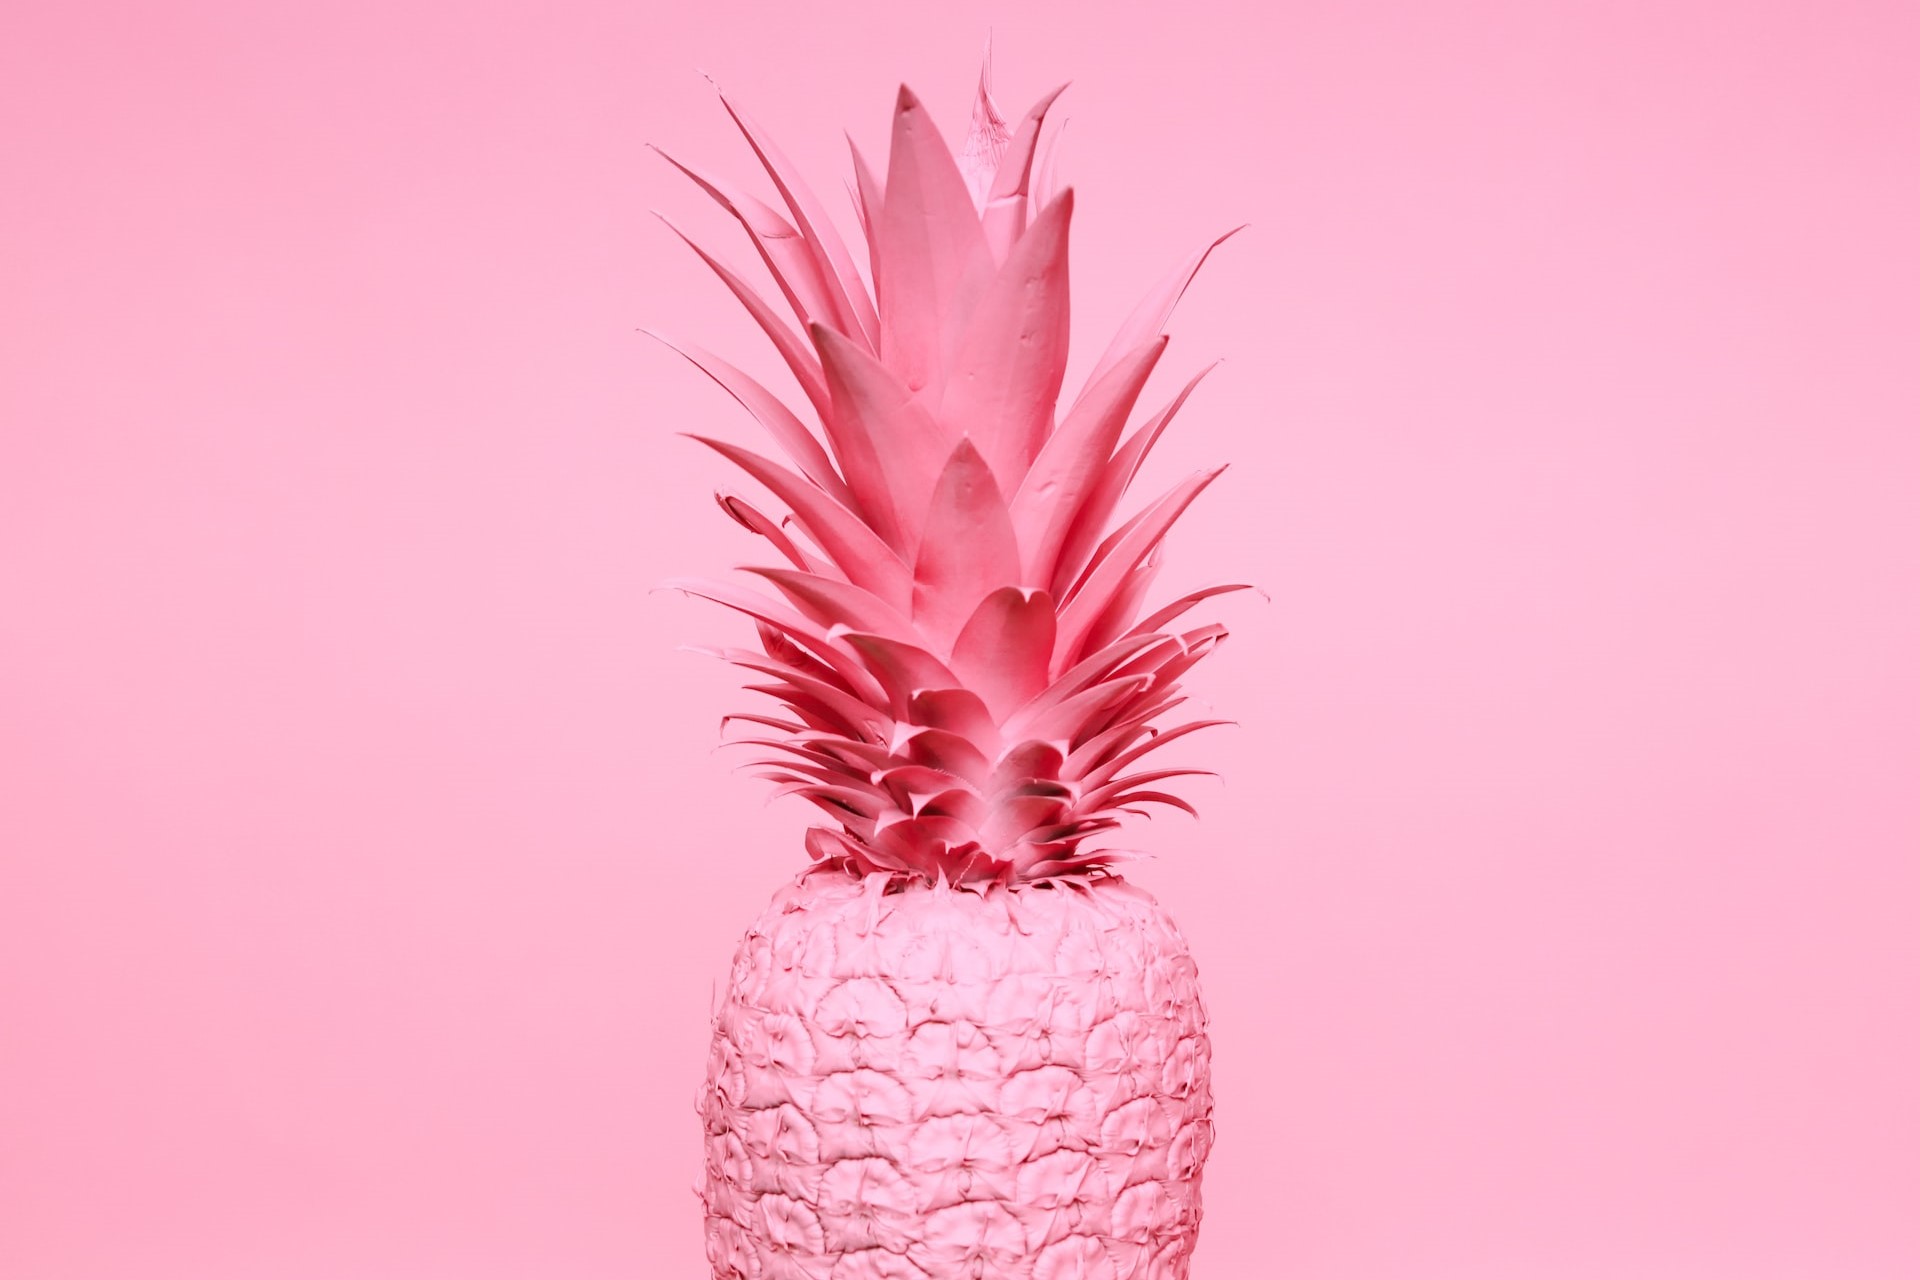 Pink pineapple against pink background